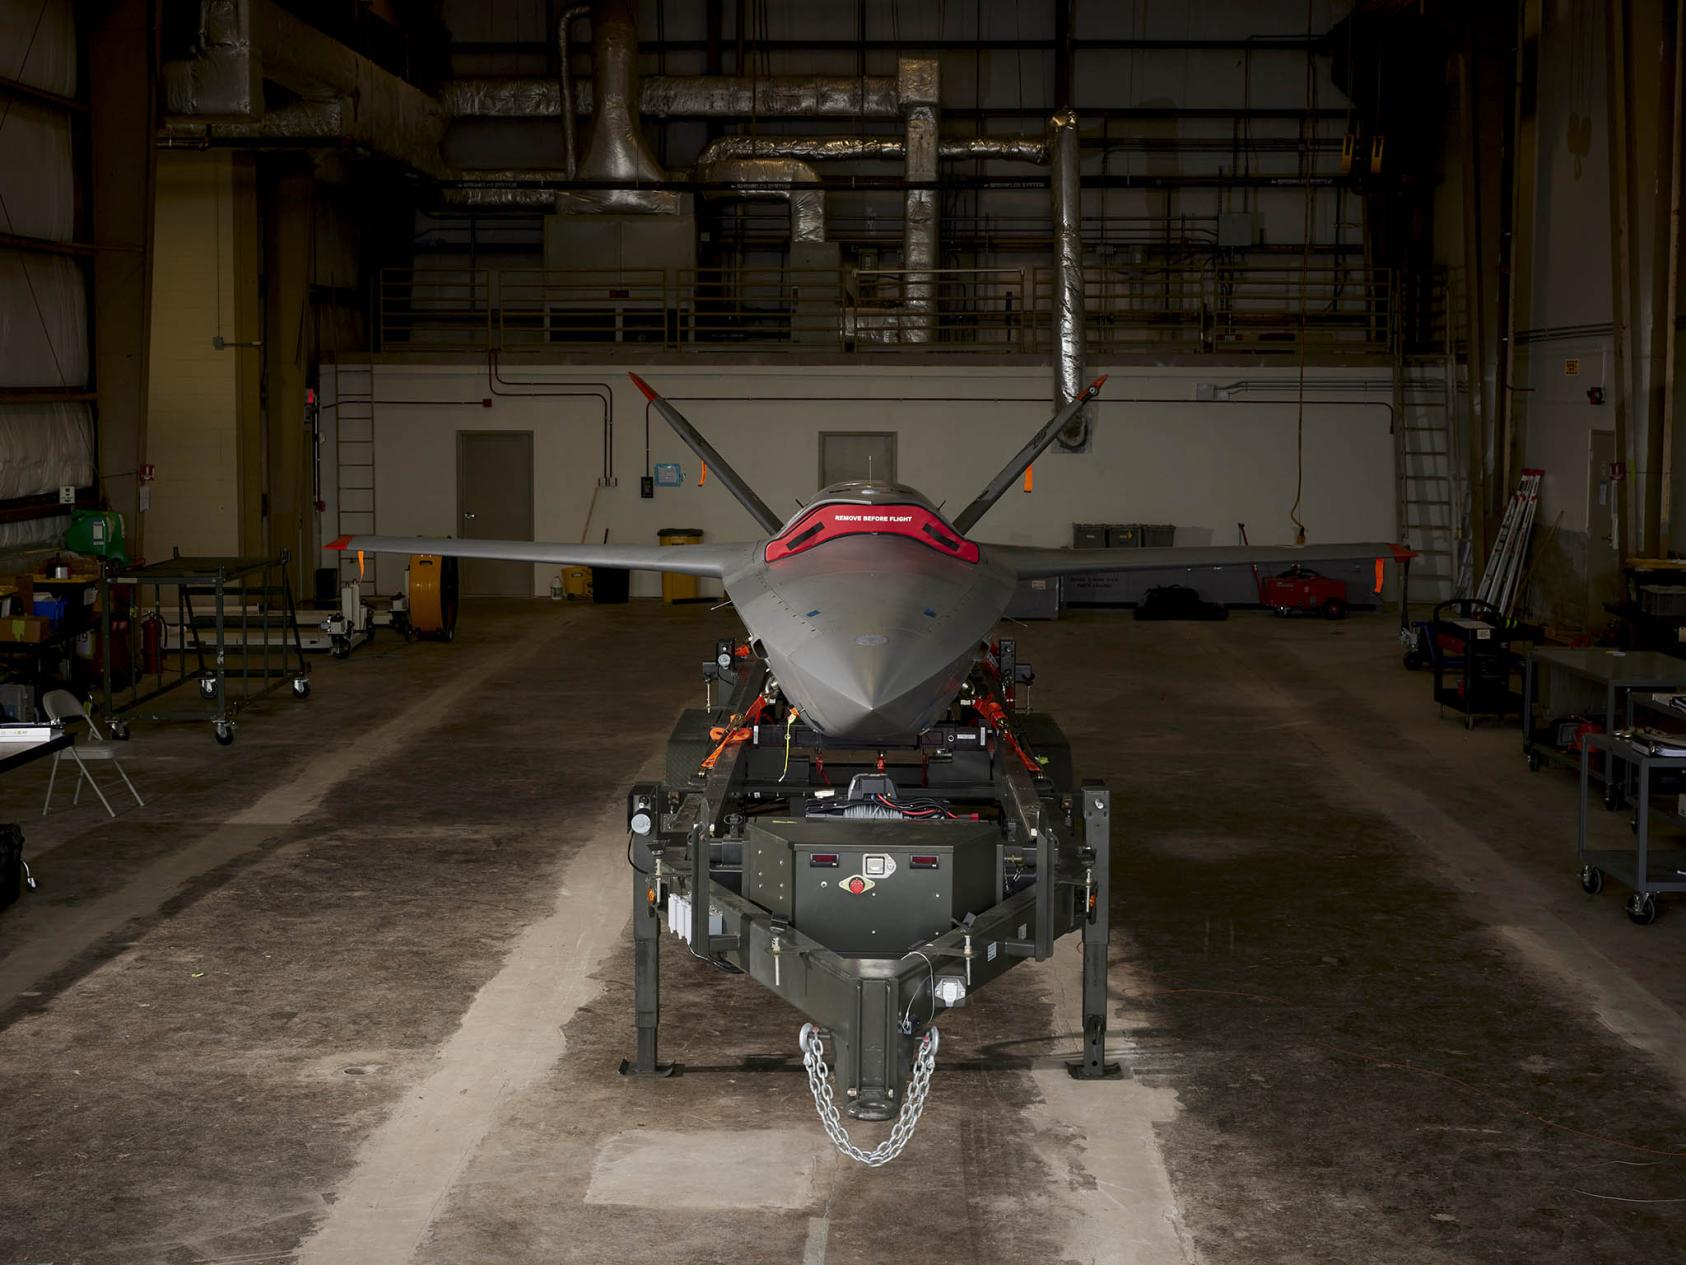 The Kratos XQ-58 unmanned combat aerial vehicle at Eglin Air Force Base, July 2023. The drone uses artificial intelligence and has the capability to carry weapons, although it has not yet been used in combat. (Edmund D. Fountain/The New York Times)